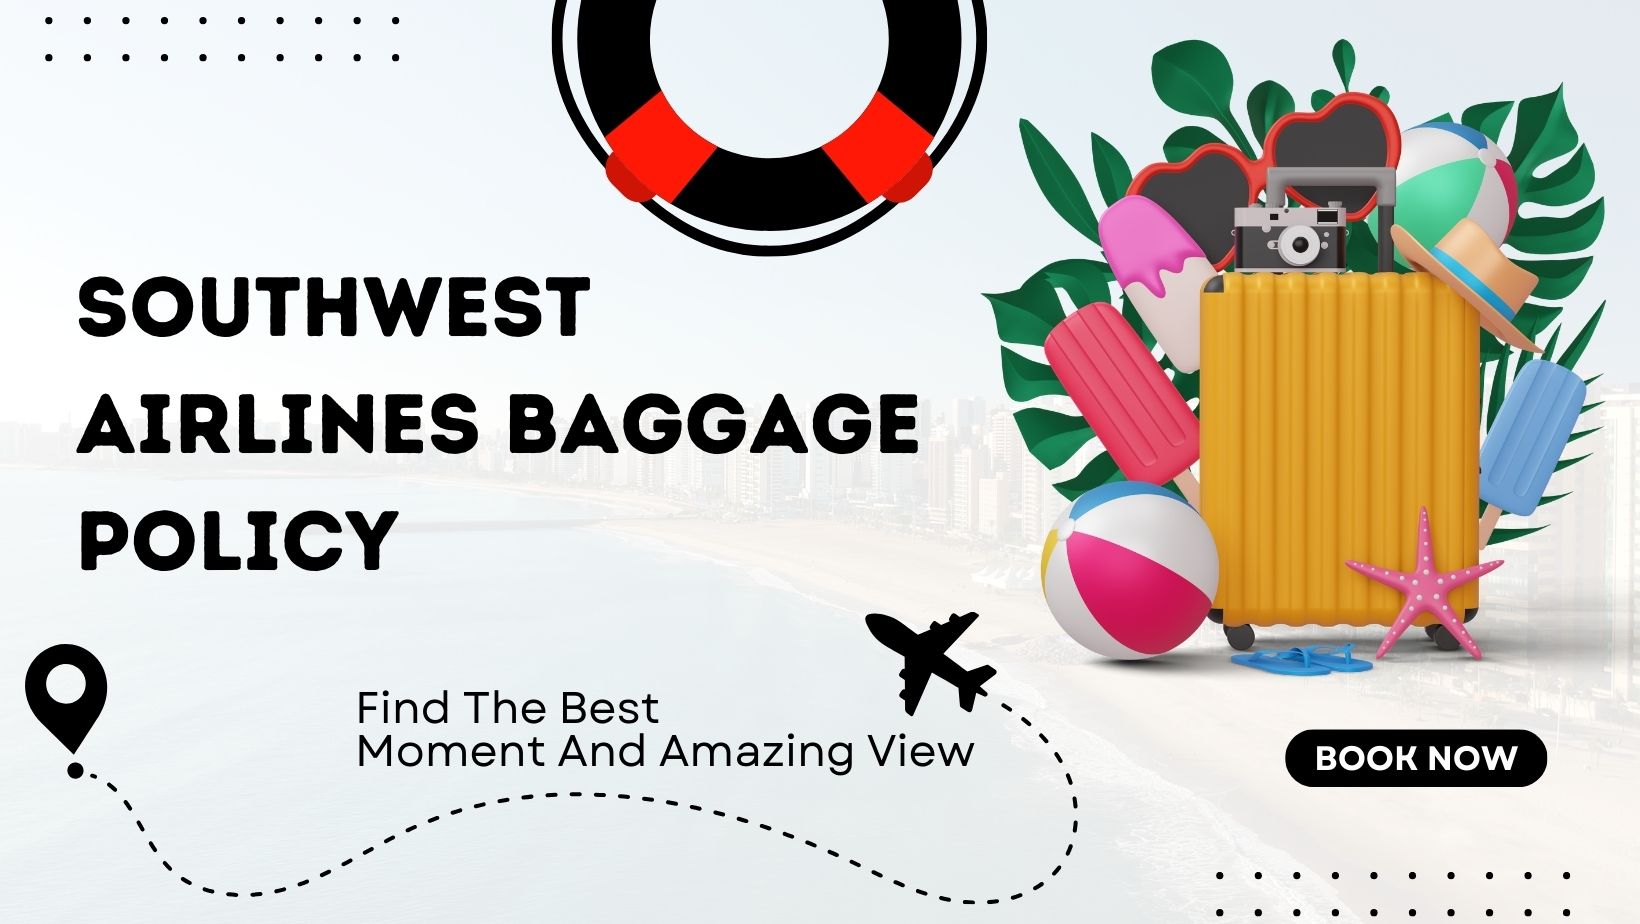 Southwest Airlines Baggage Policy